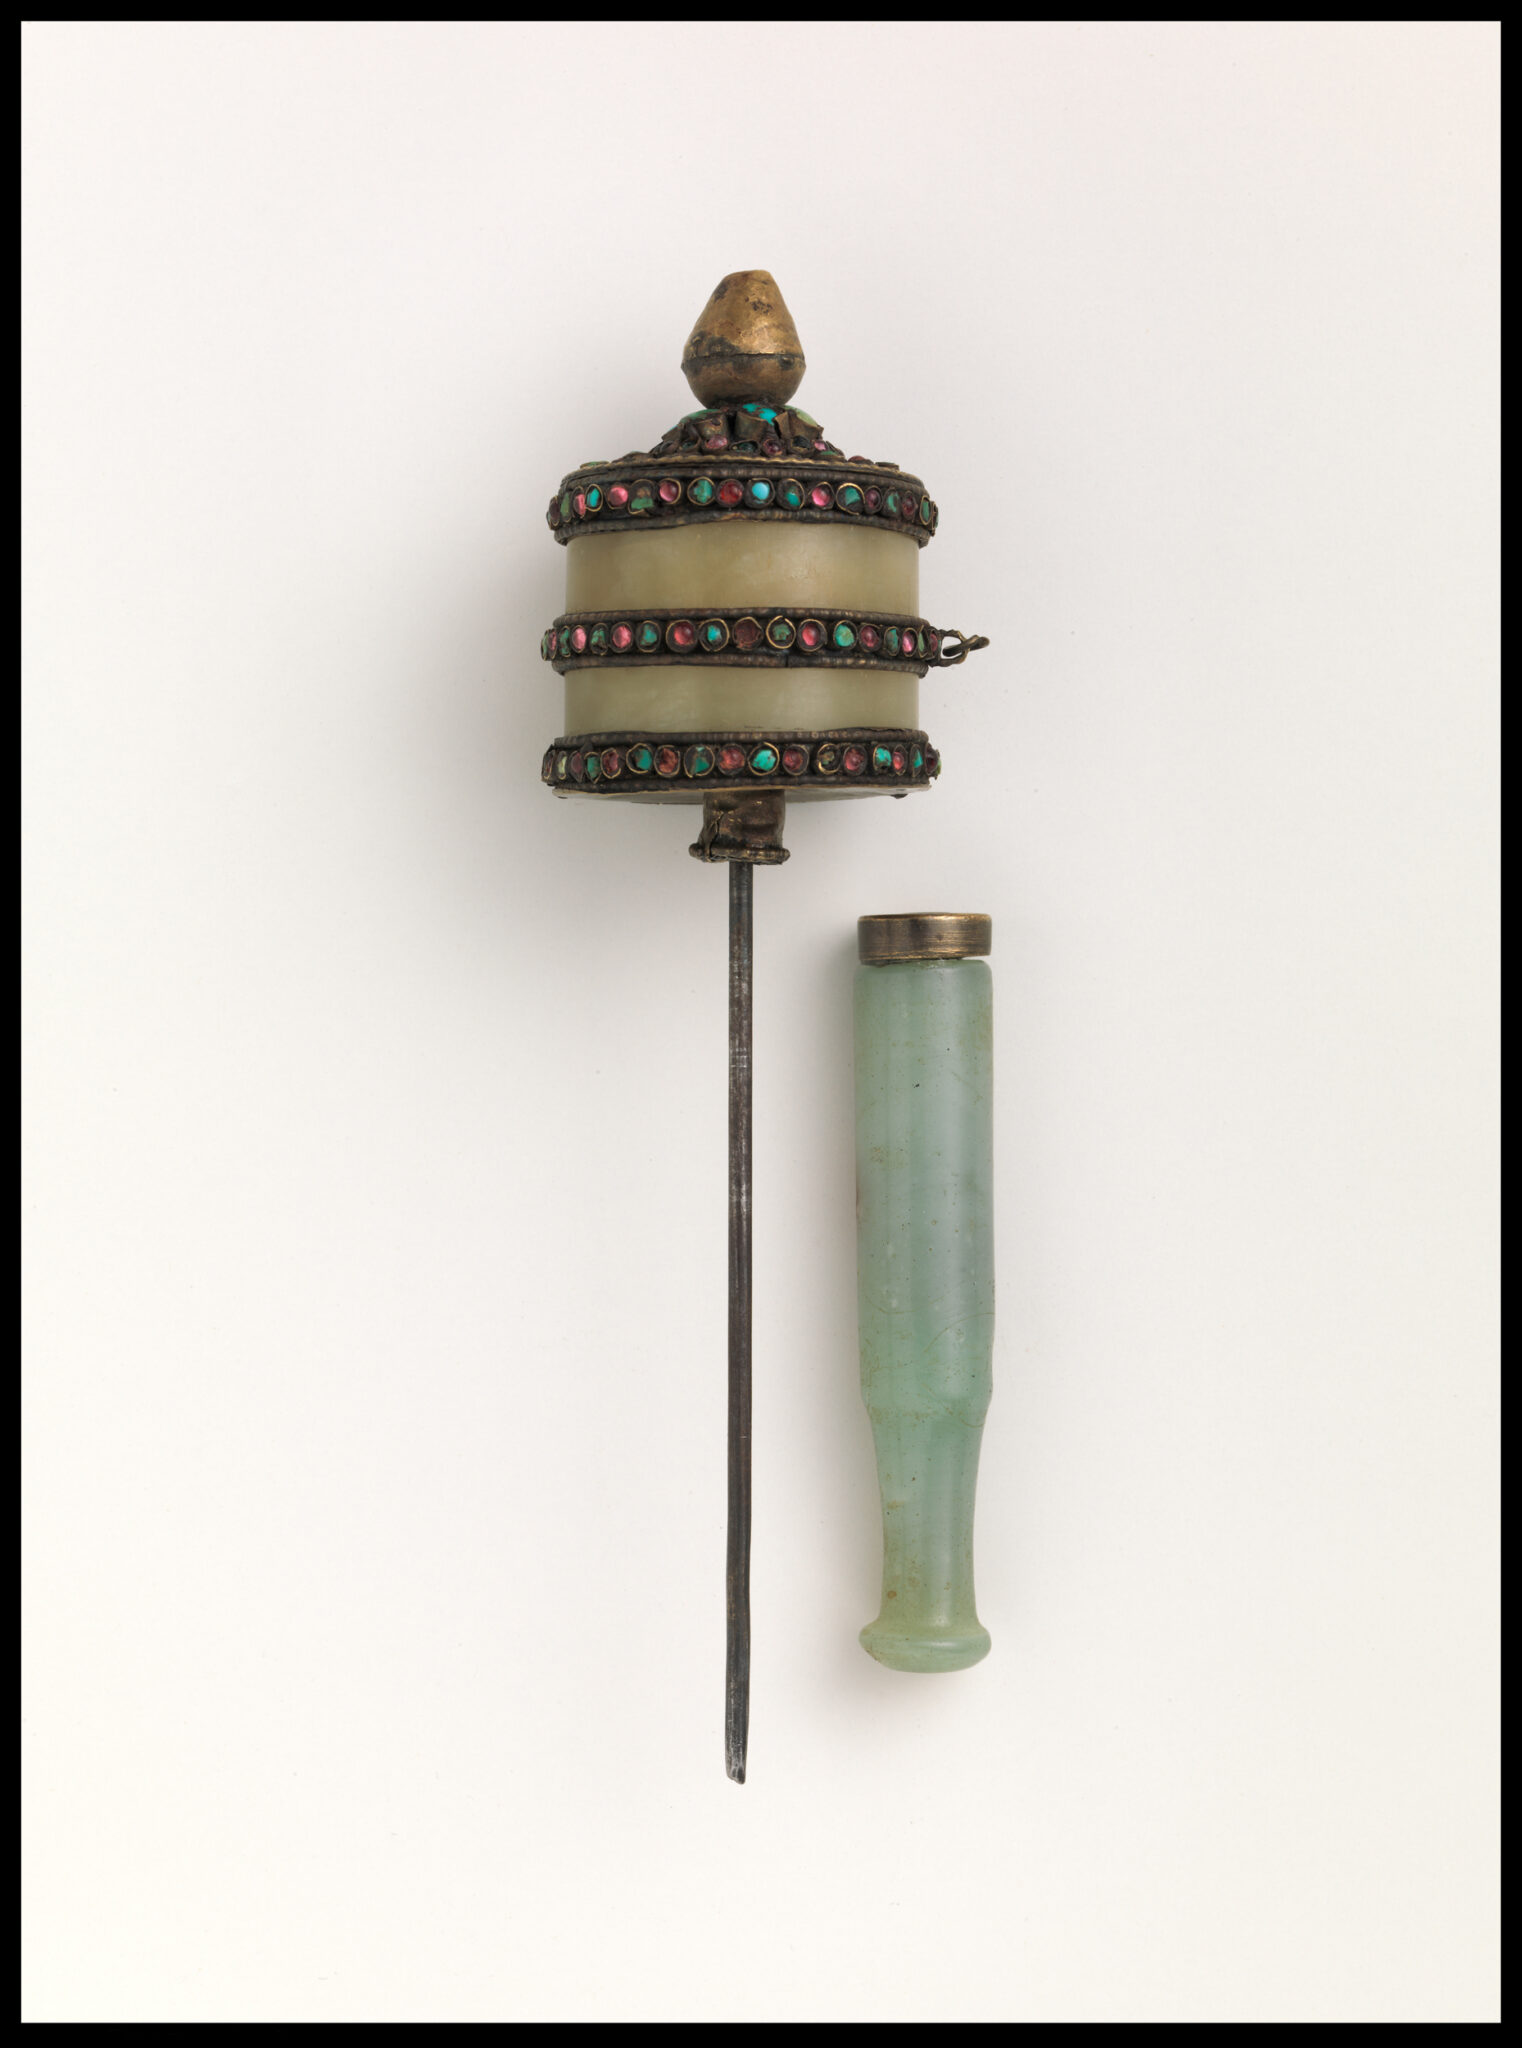 Glass cylinder featuring three stone-decorated bands mounted on spindle; green jade handle at right